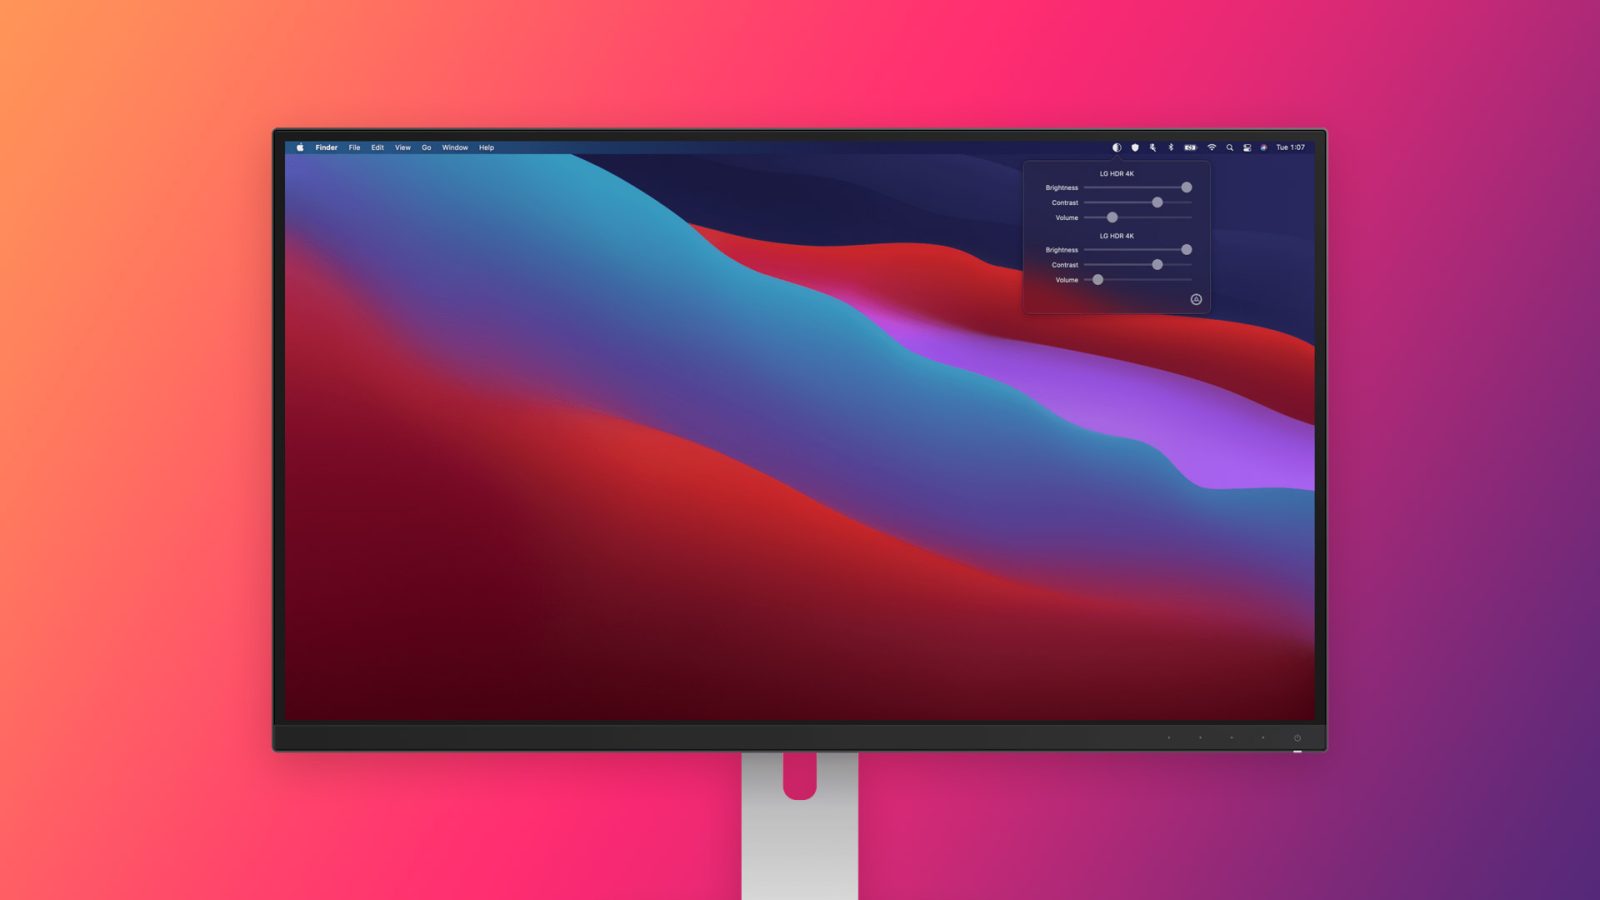 DisplayBuddy lets you control the brightness of external displays from your Mac